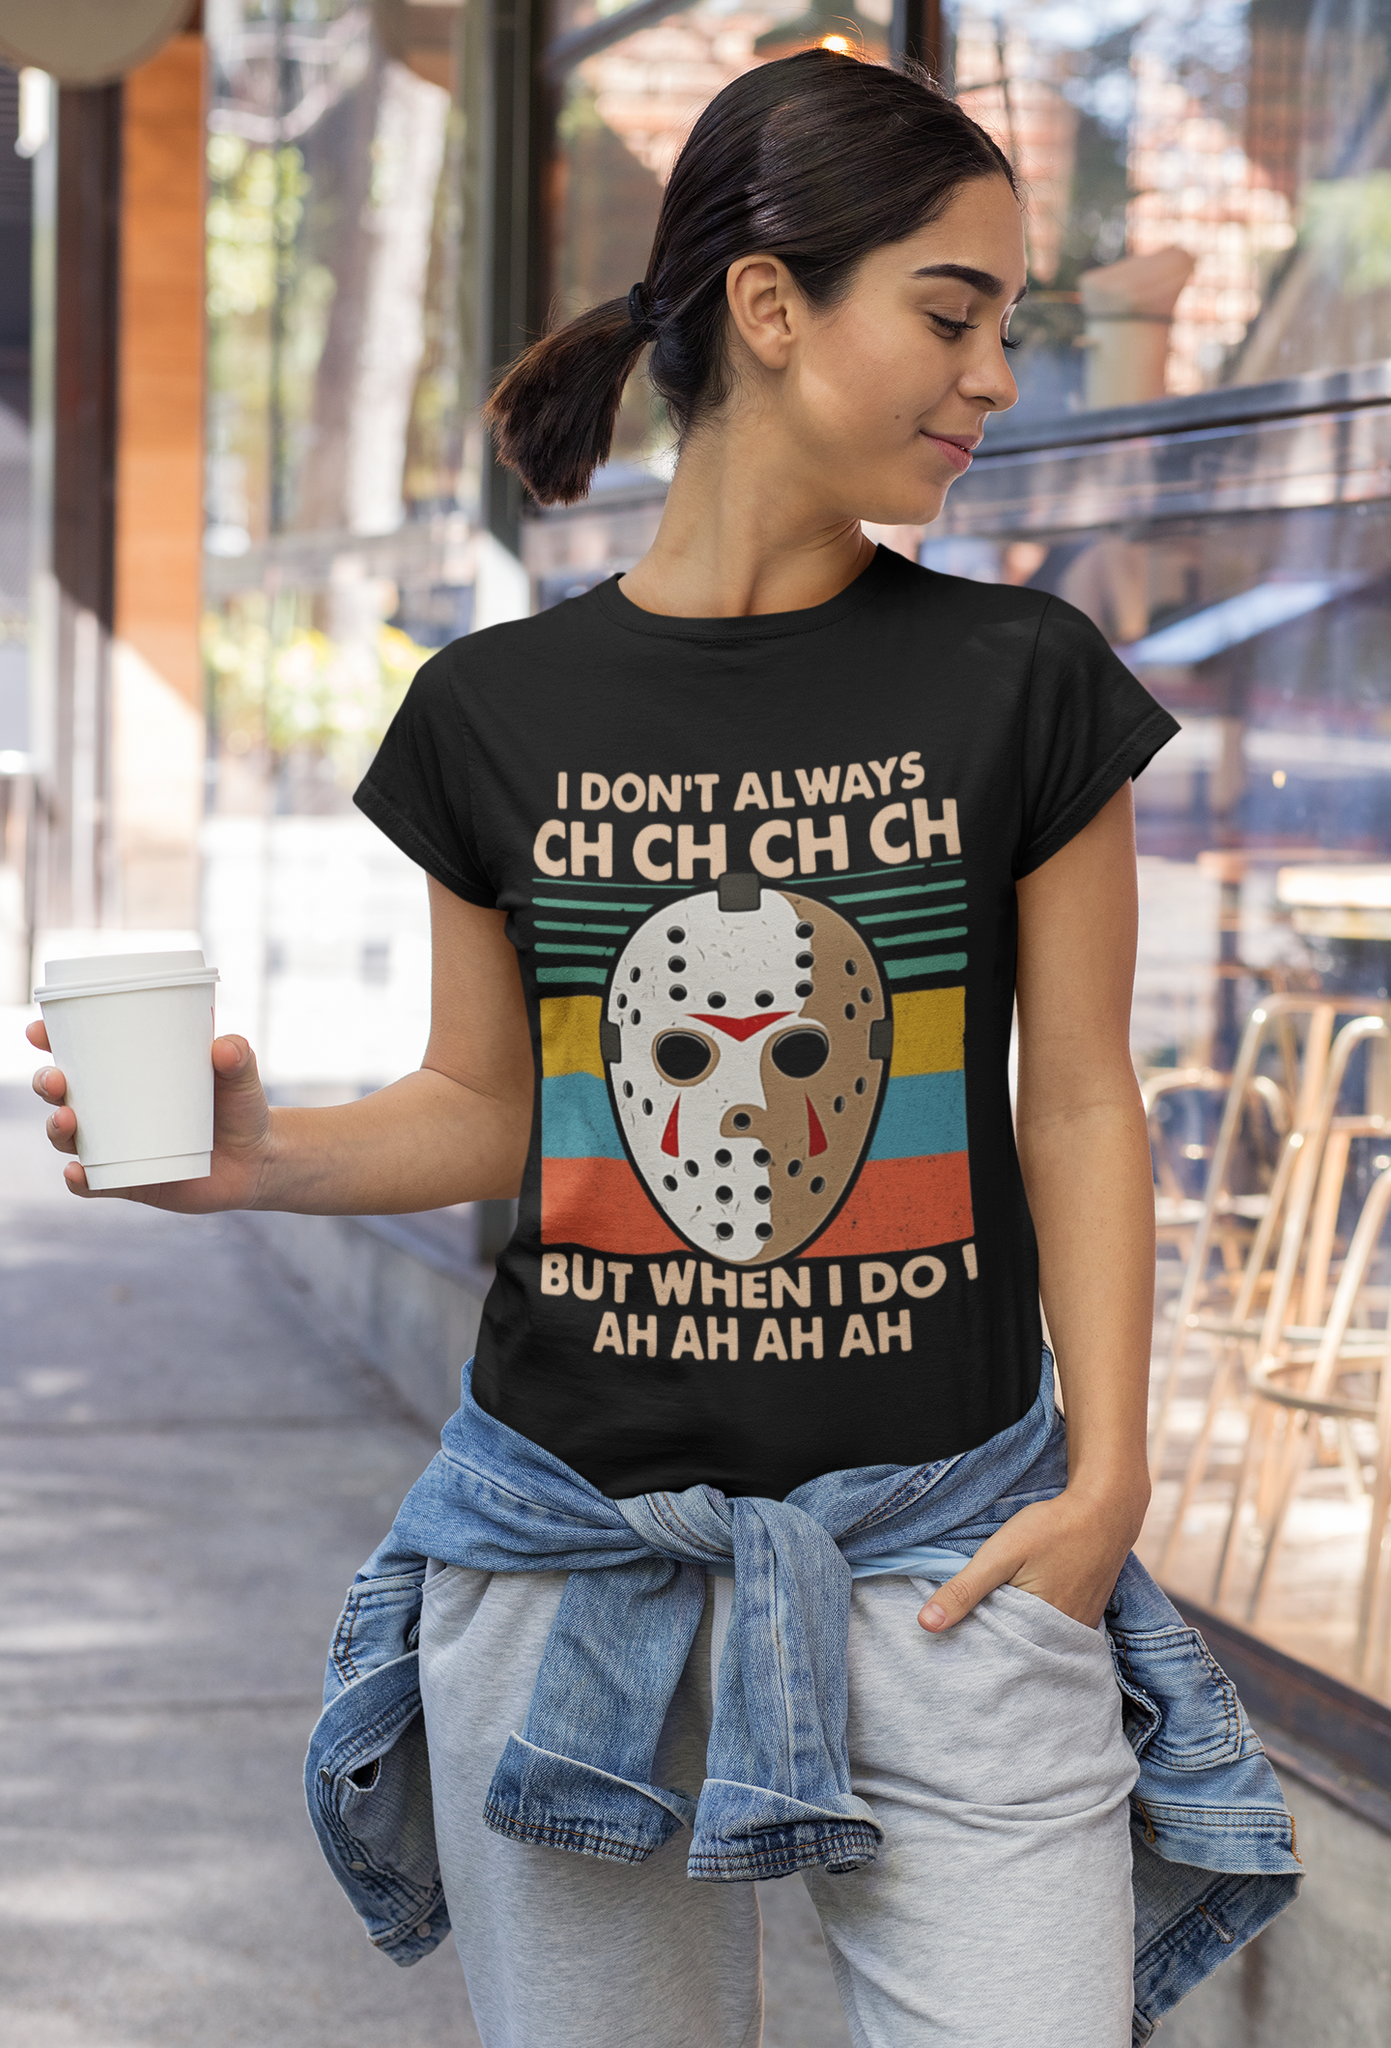 Friday 13th Vintage T Shirt, Jason Voorhees Mask T Shirt, I Dont Always Ch Ch Ch Tshirt, Halloween Gifts